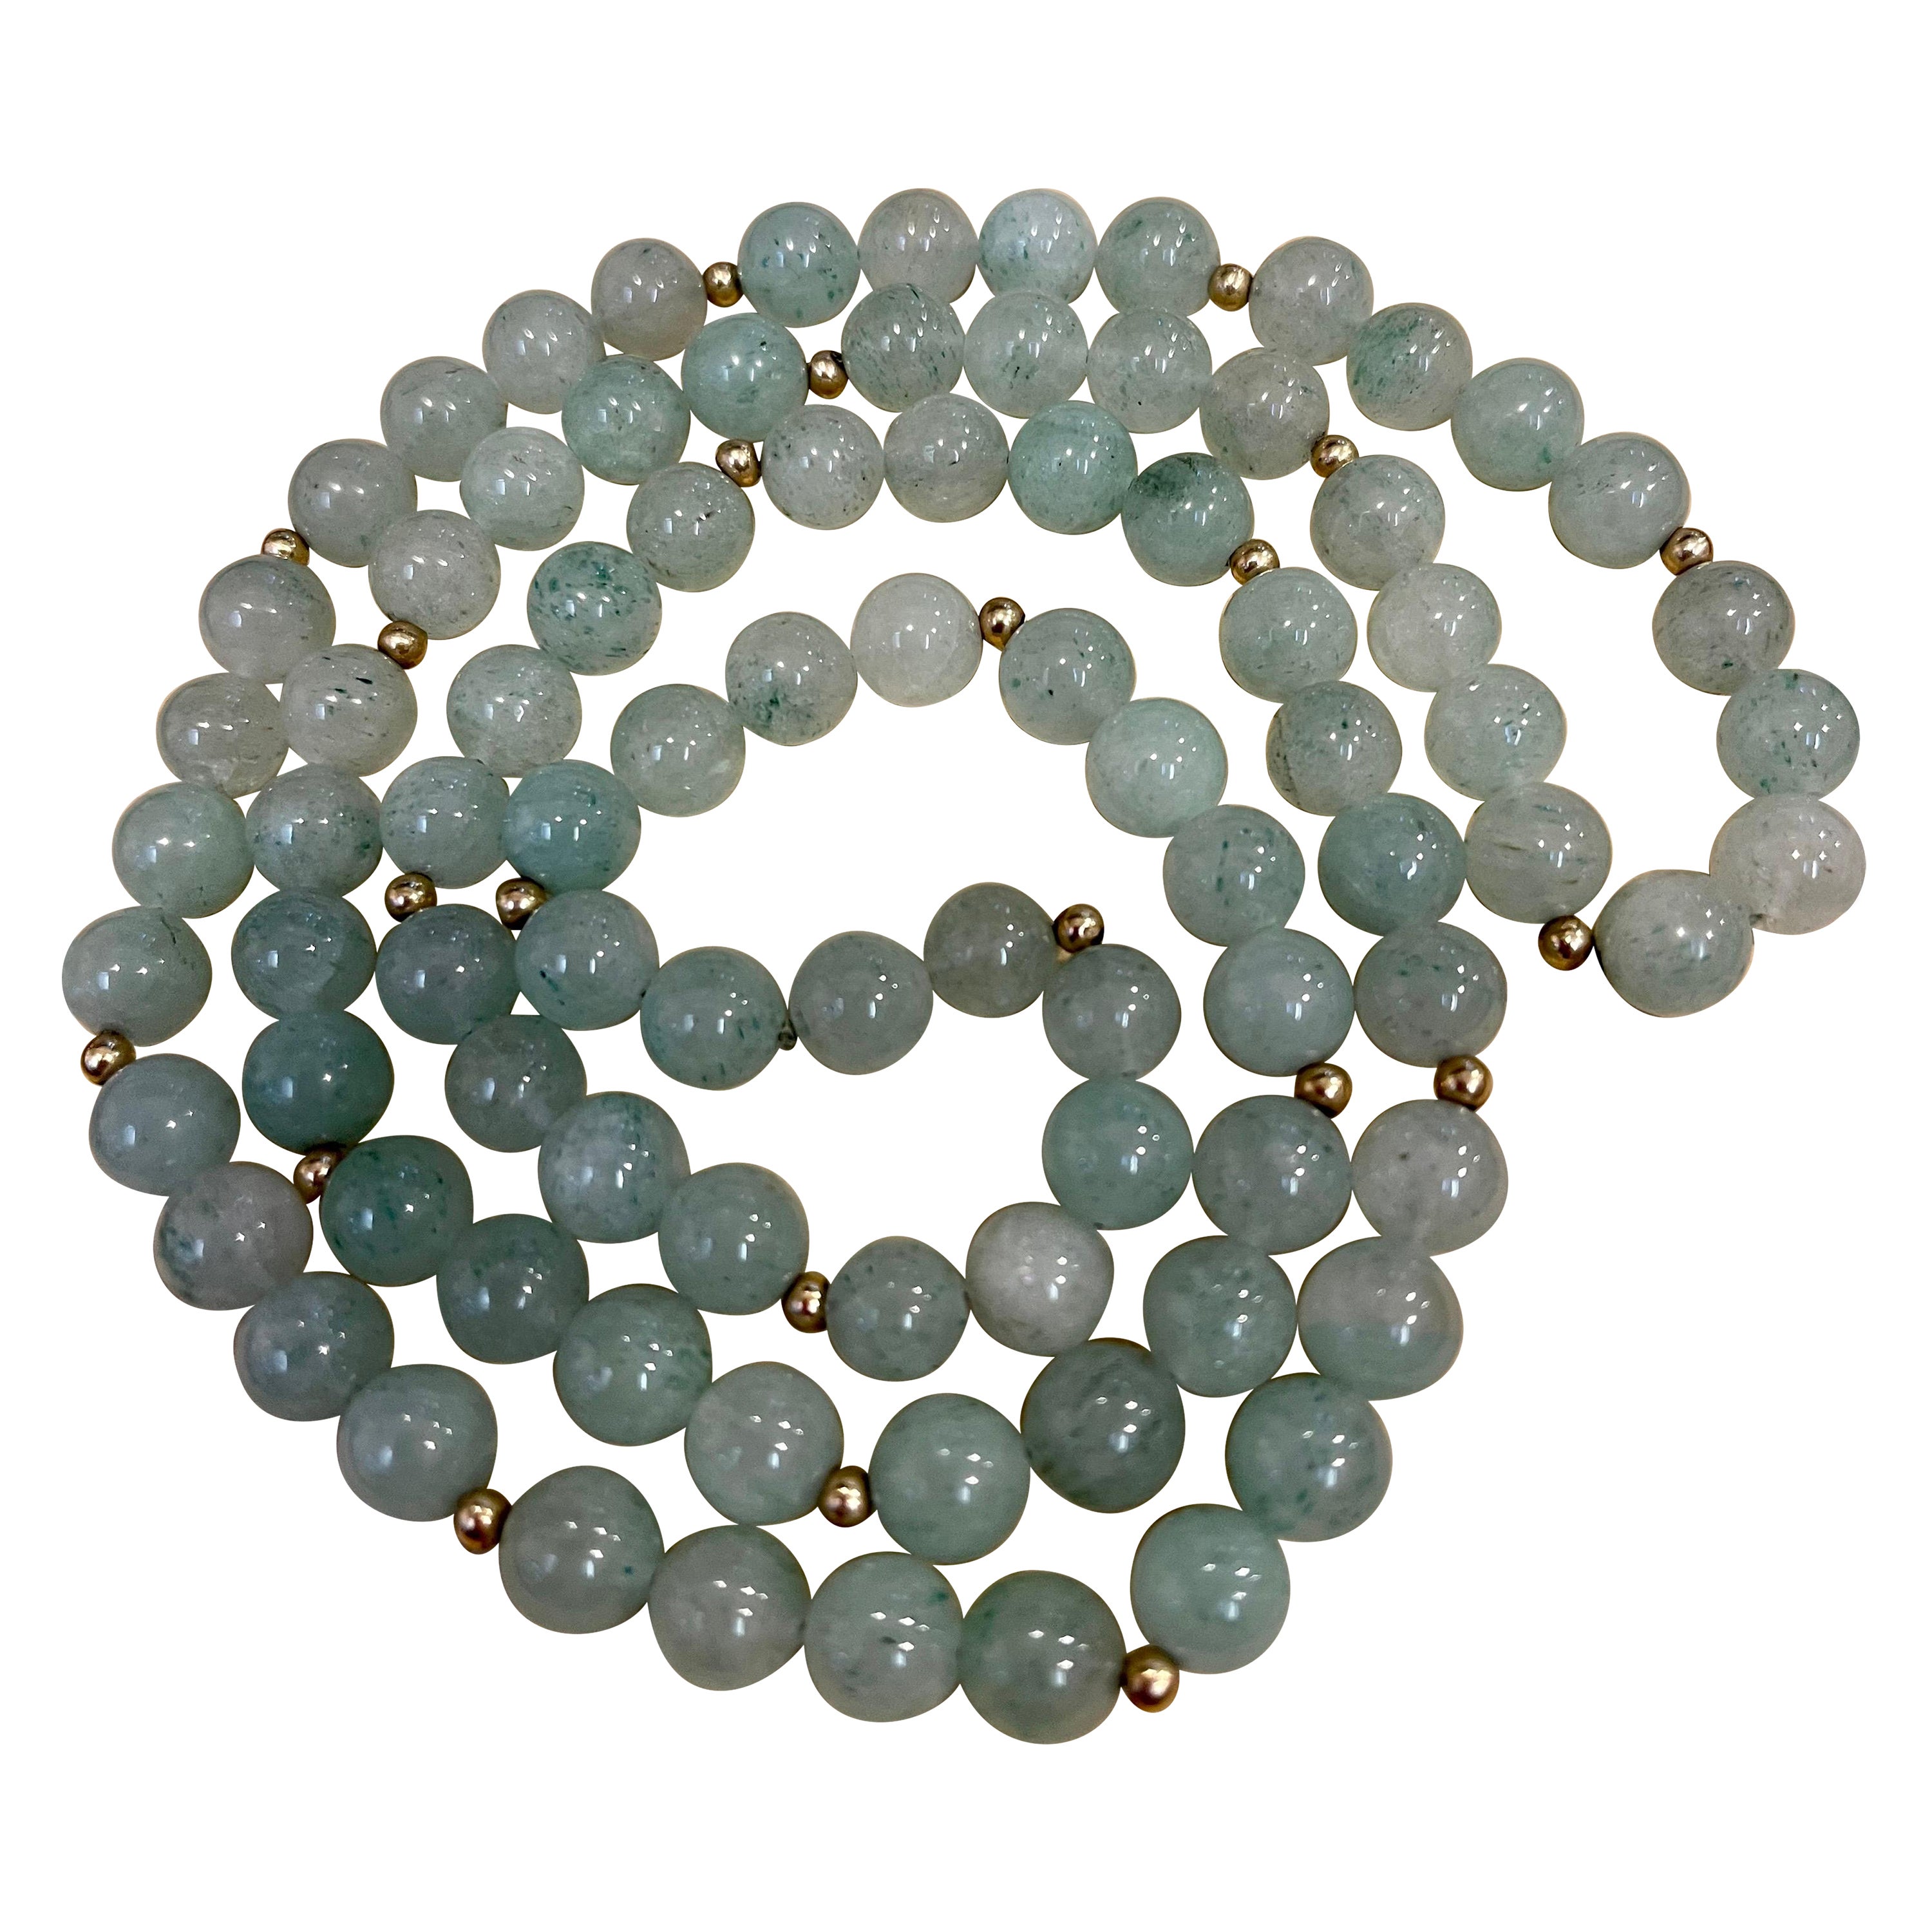 Grade A+ Green Quartz Crystal Bead Necklace 8.5 mm With 14 K Gold Beads, Genuine For Sale